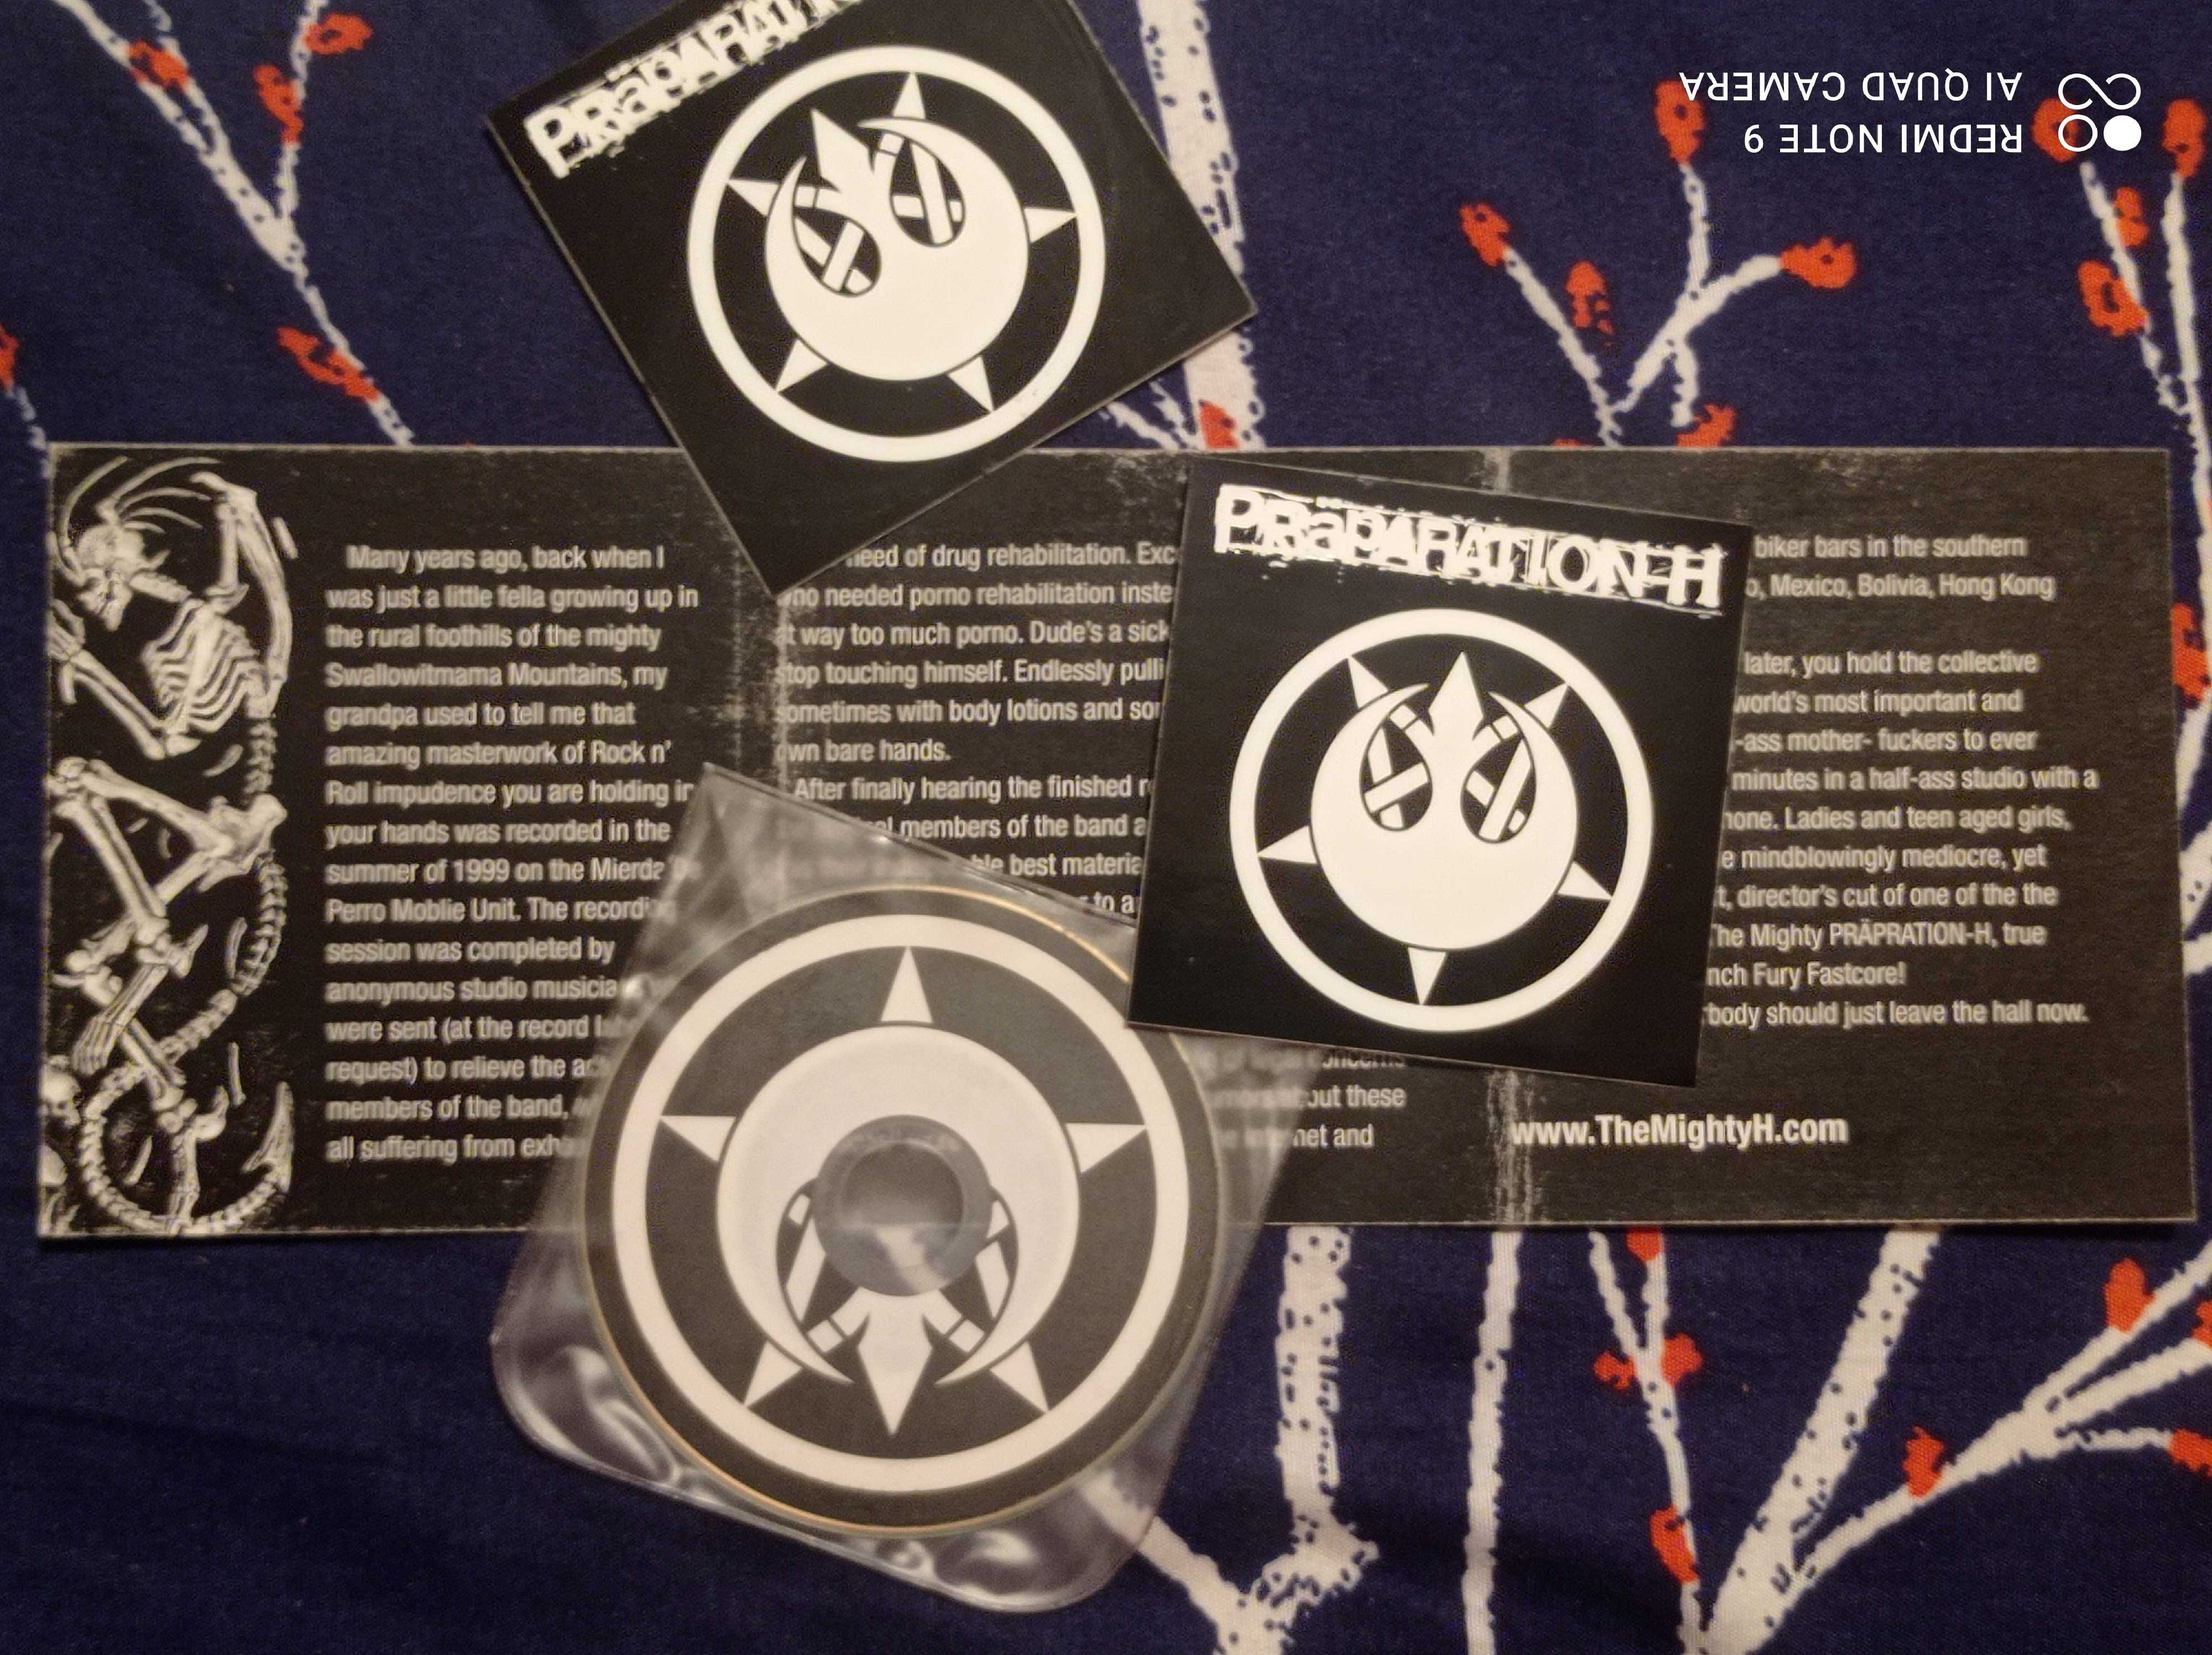 Präparation-H – Eight Hits From Hell grindcore Denak Dahmer Abstain